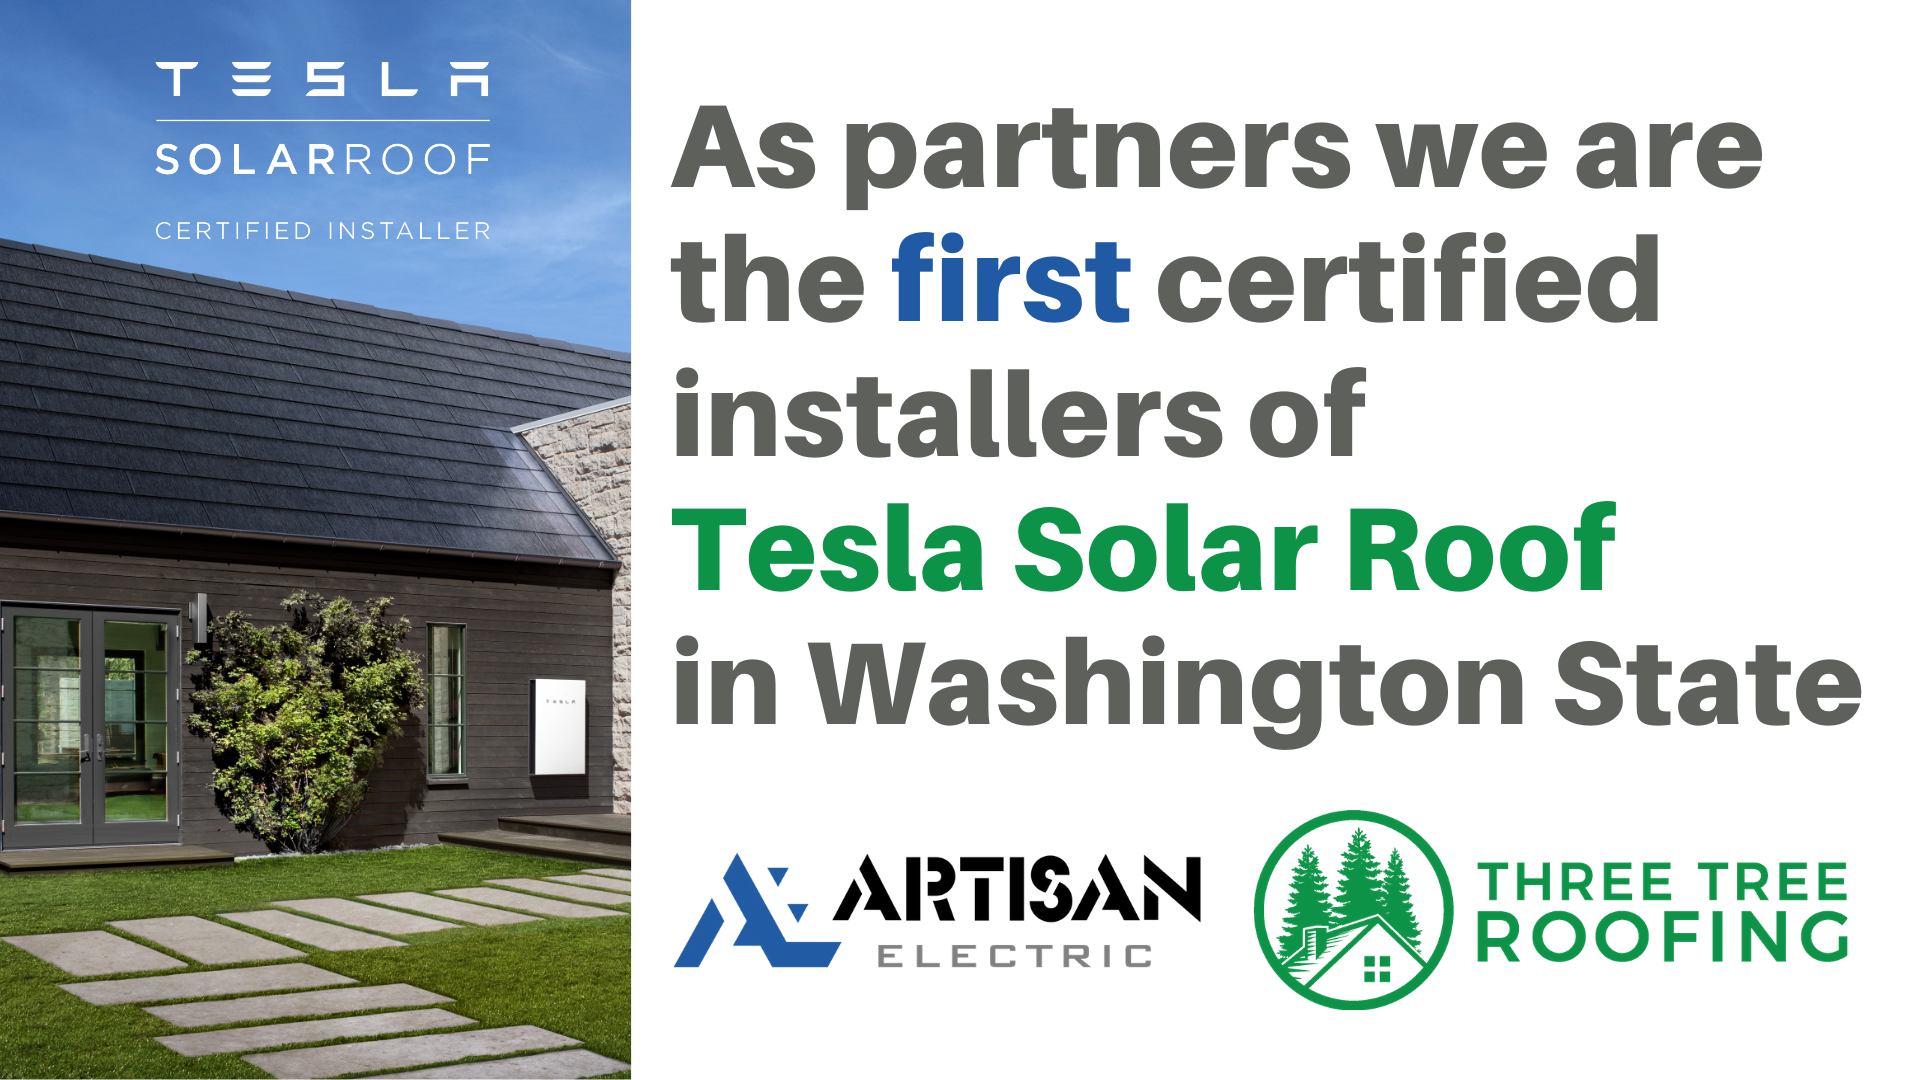 Tesla Solar Roof Now Available Here!